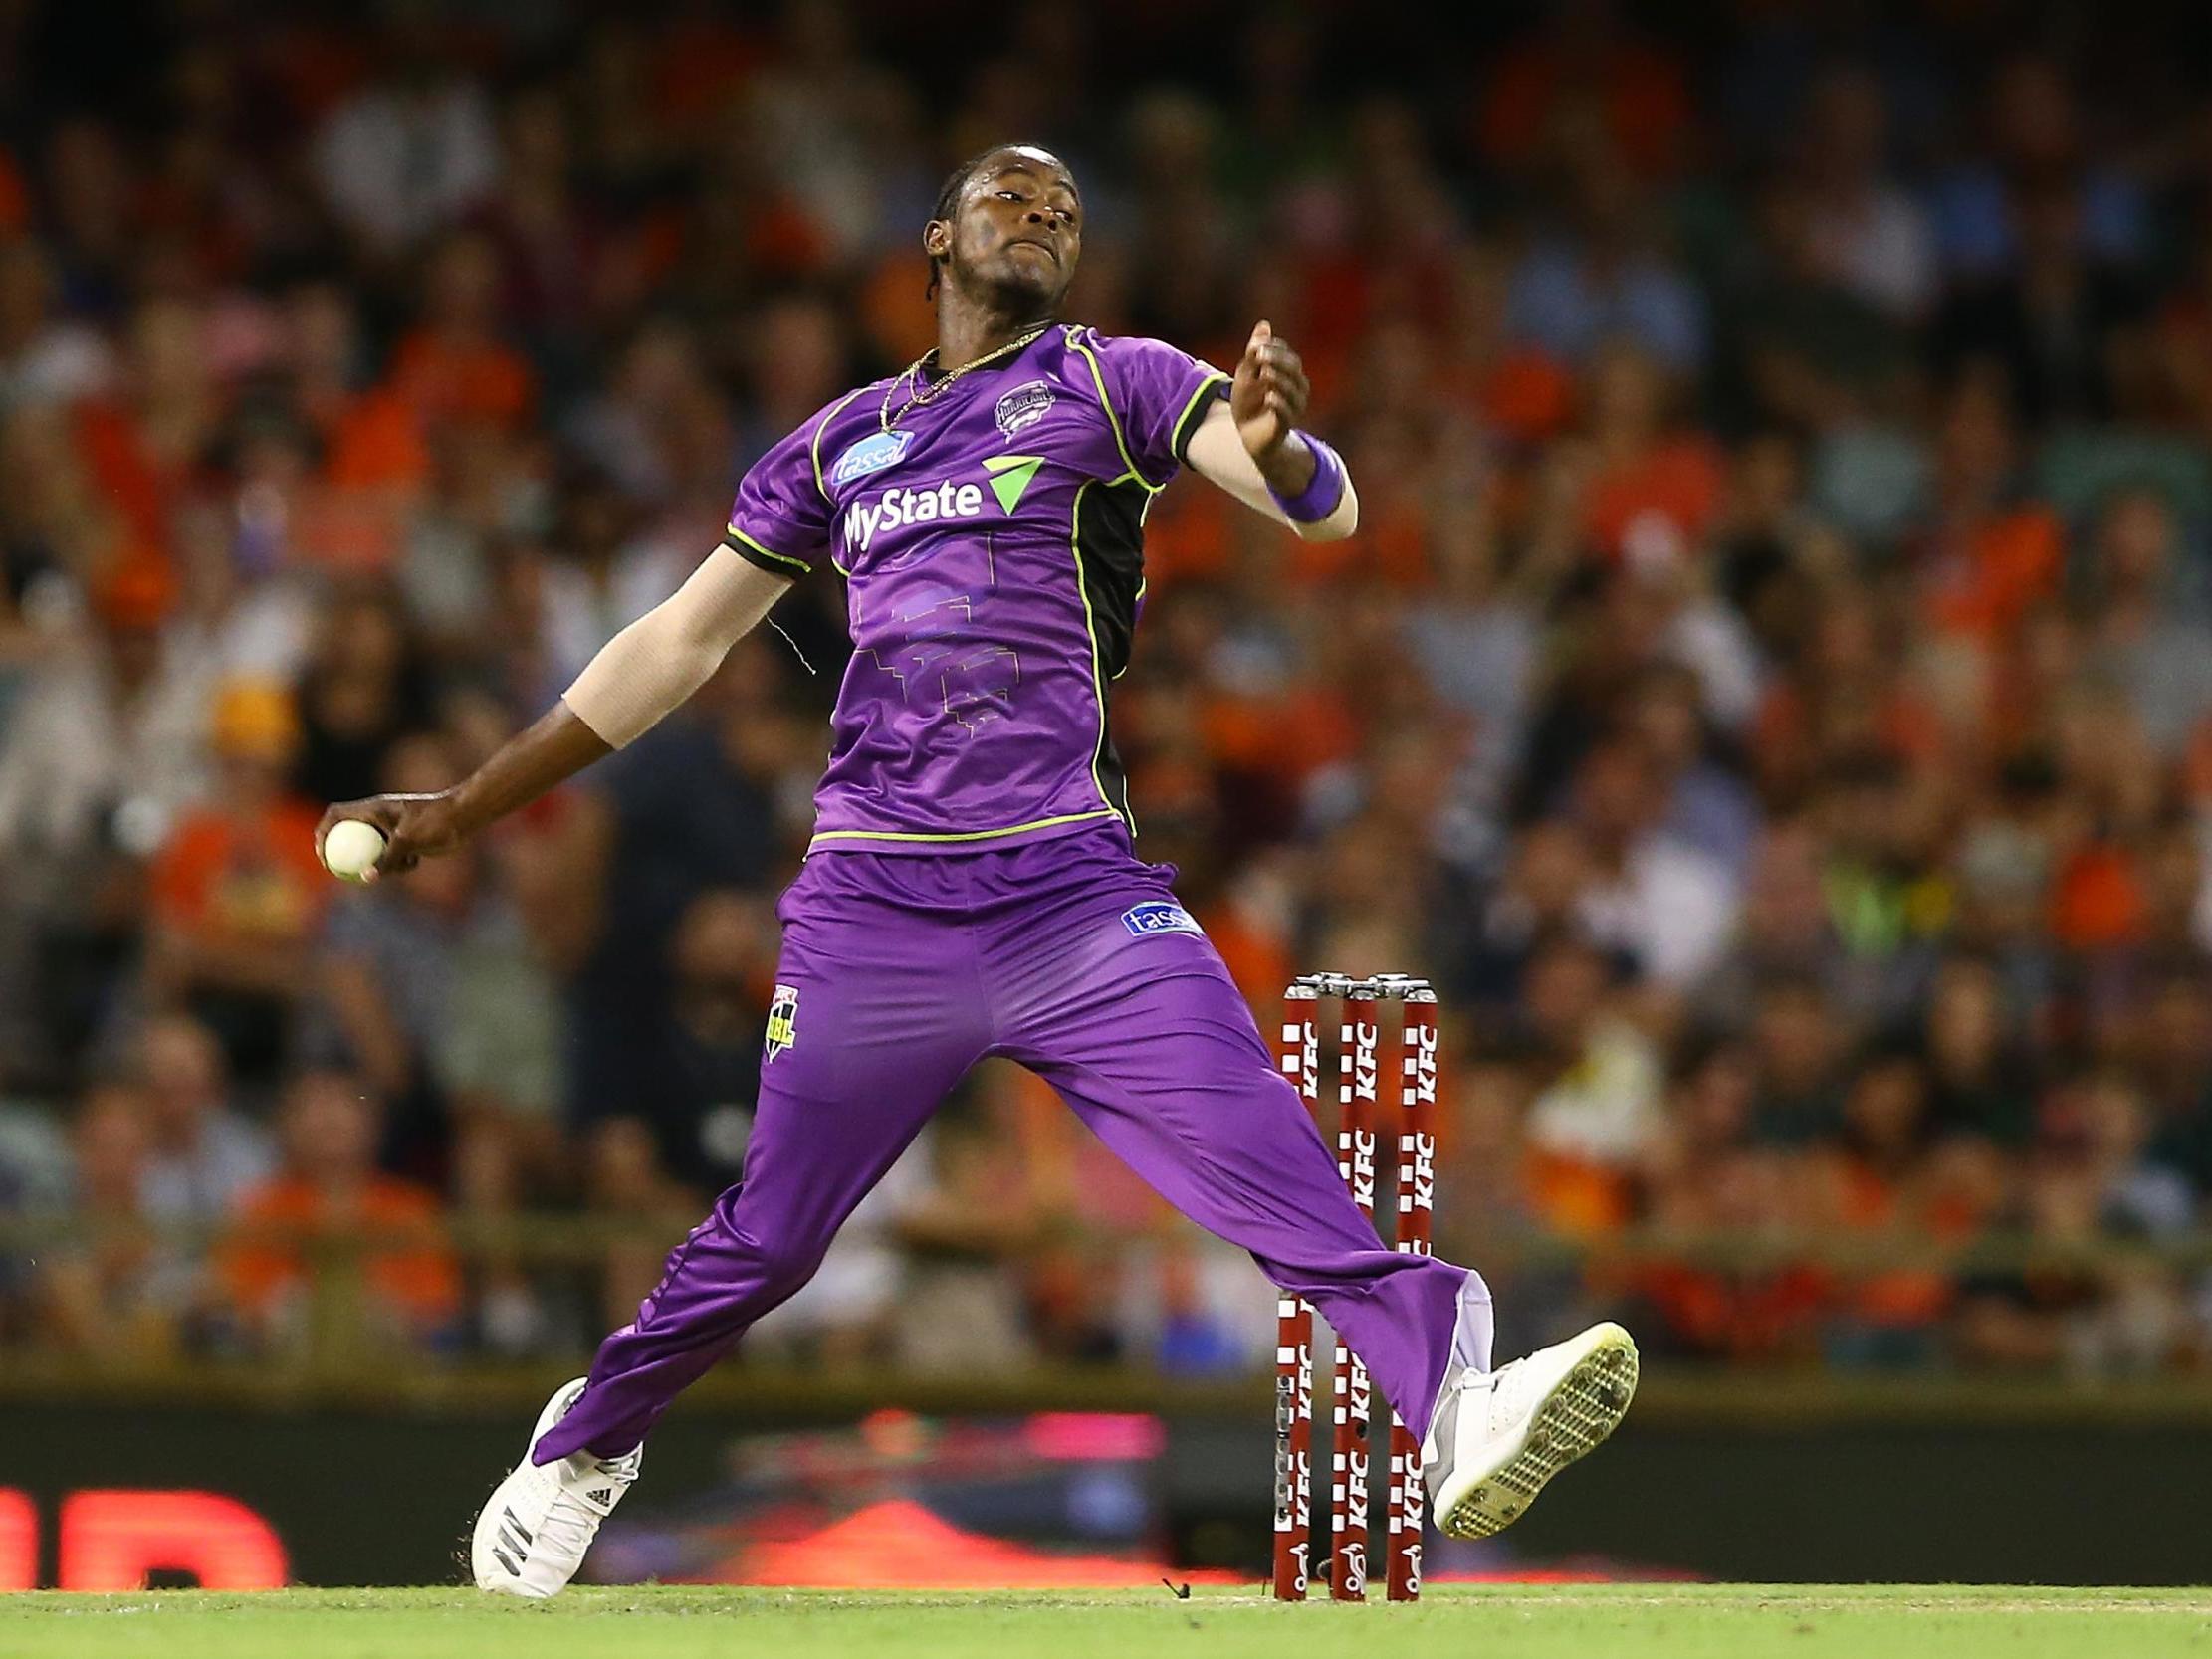 Jofra Archer in action for the Hurricanes earlier this year